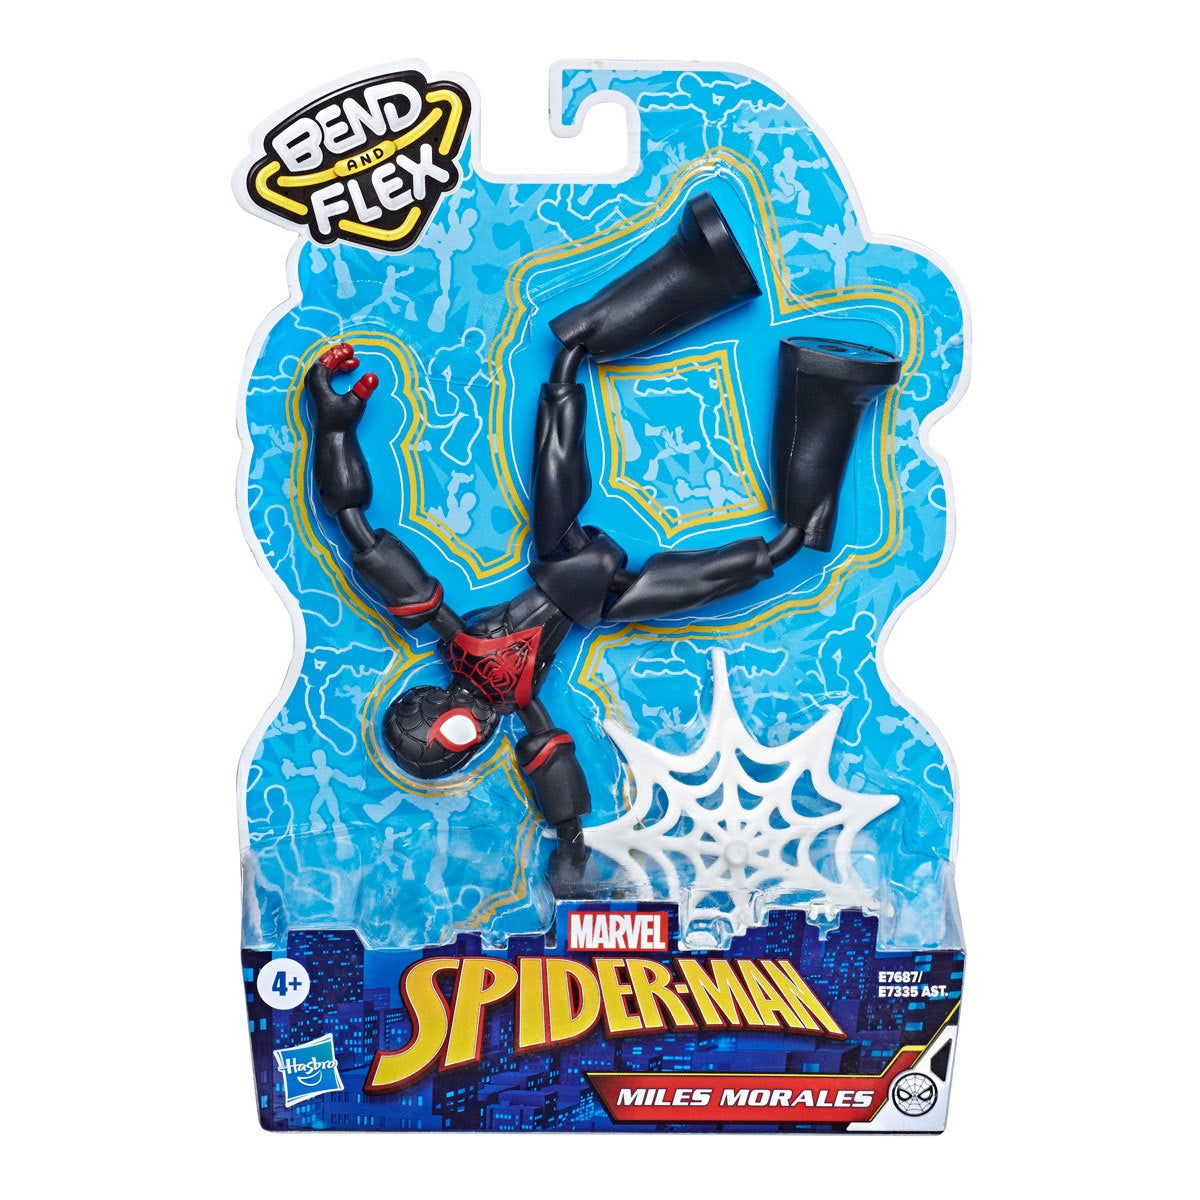 Marvel Spider-Man Bend and Flex Figure (Styles Vary - One Supplied)